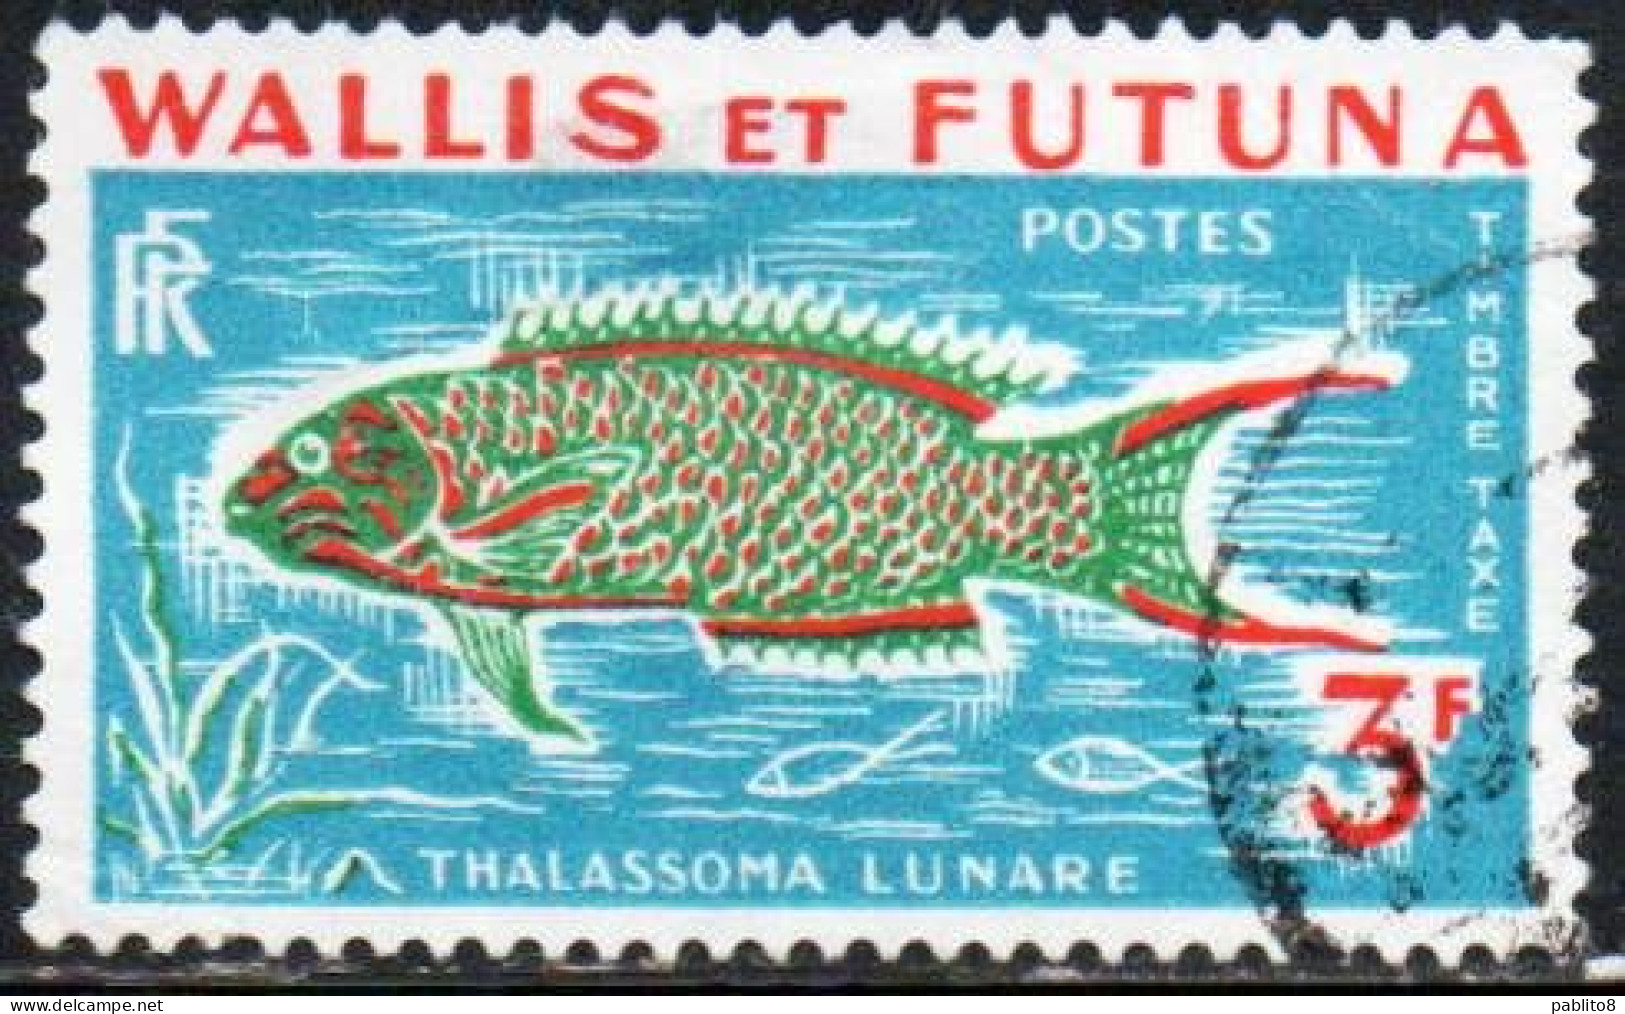 WALLIS AND FUTUNA ISLANDS 1963 POSTAGE DUE STAMPS TAXE SEGNATASSE THALASSOMA LUNARE 3fr USED USATO OBLITERE' - Postage Due